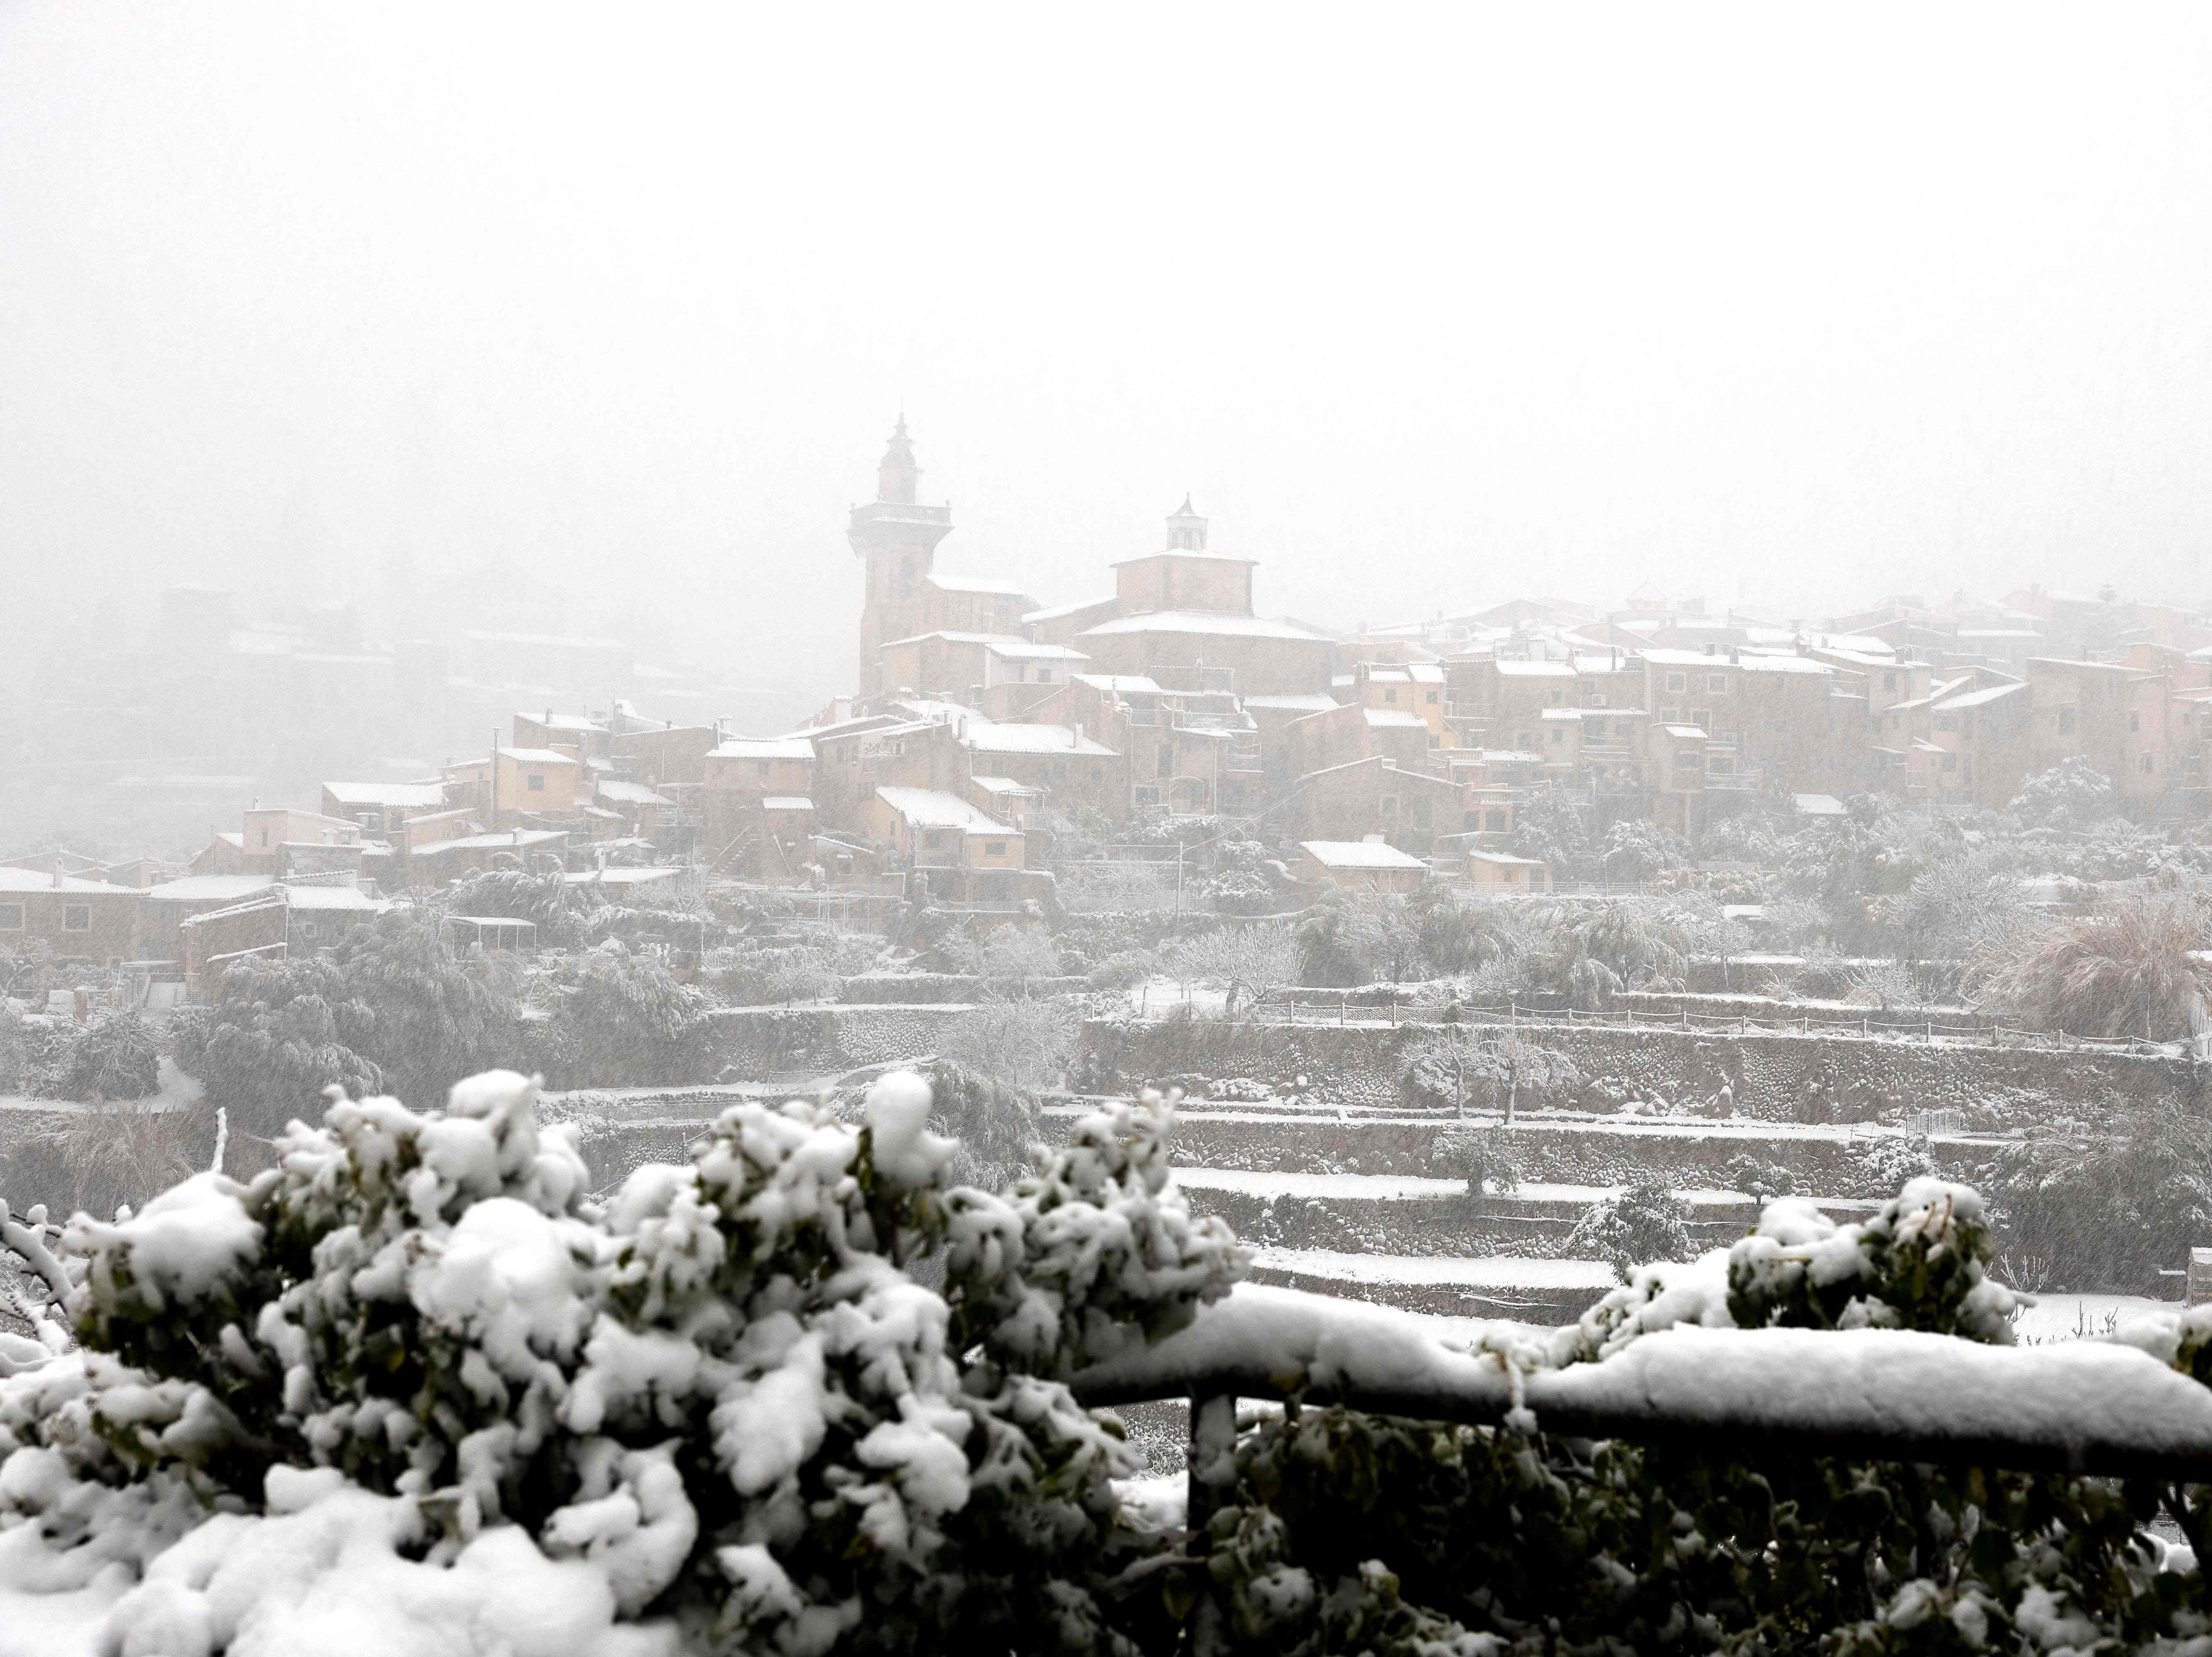 The mountain village of Valldemossa covered in snow, on the Spanish Balearic island of Mallorca